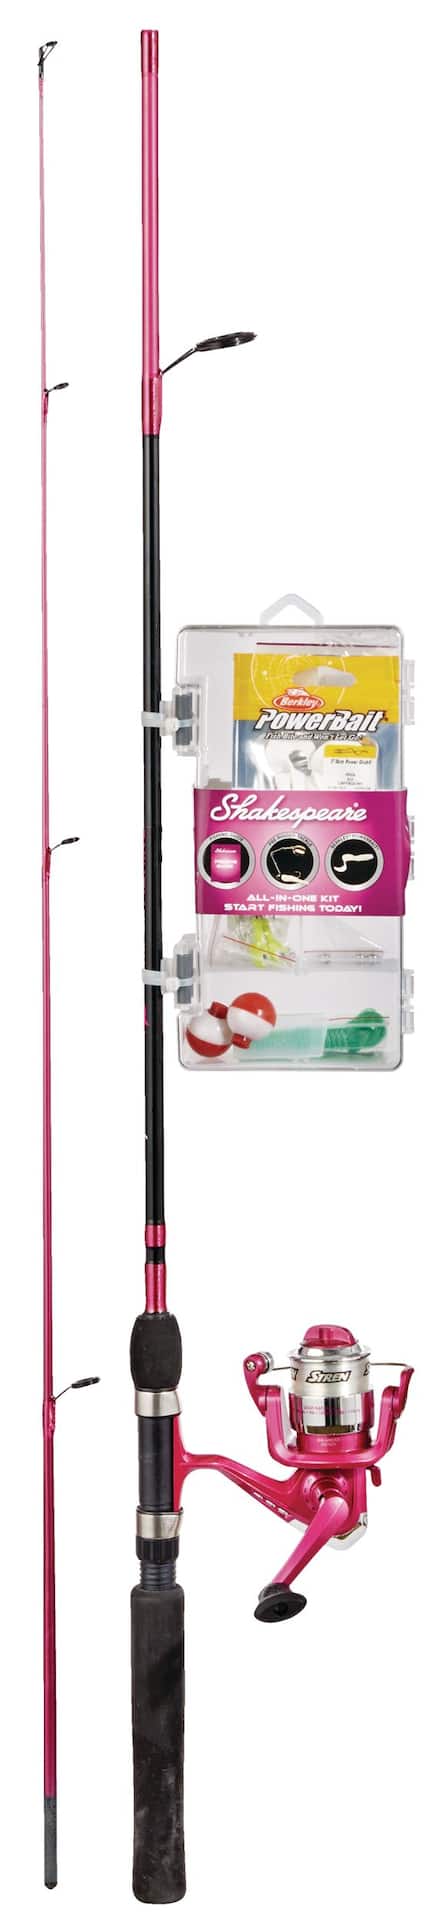 Simply Fishing Ladies Spinning Fishing Rod and Reel Combo with Tackle Kit,  Pre-Spooled, Medium, 6-ft, 3-pc